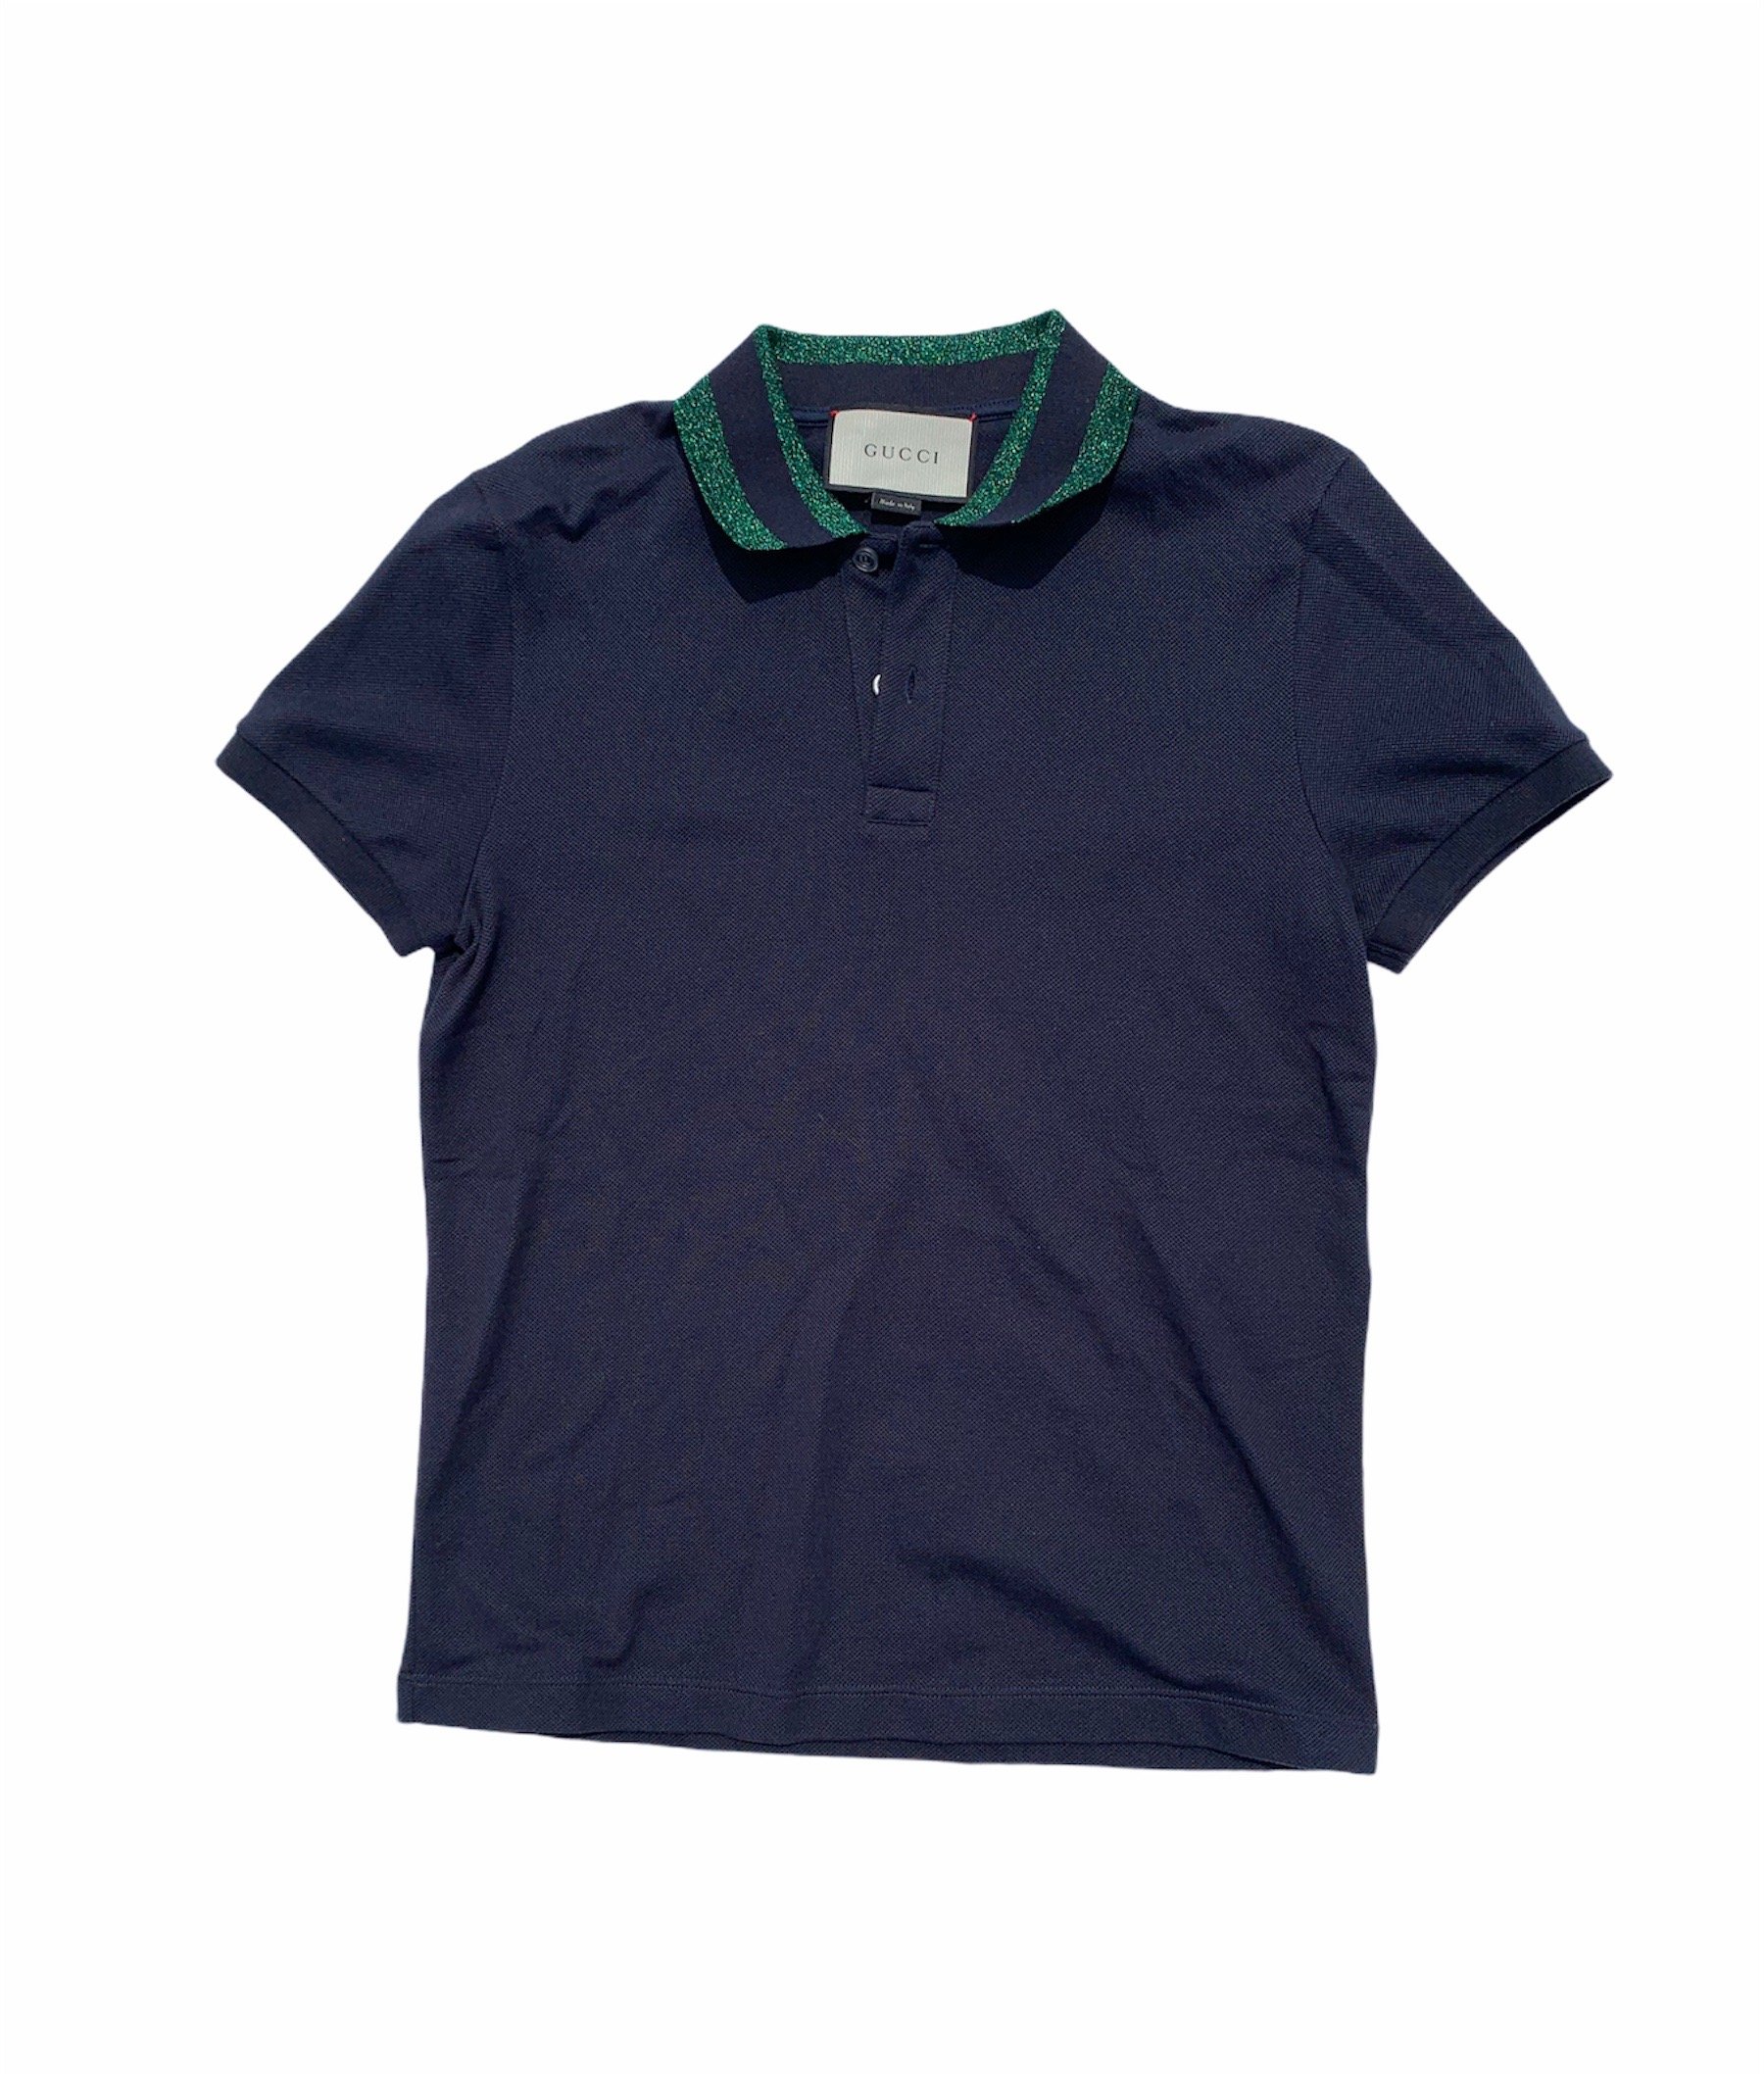 Navy Polo Shirt With Green Glitter Collar | Reissue: Buy & Sell ...